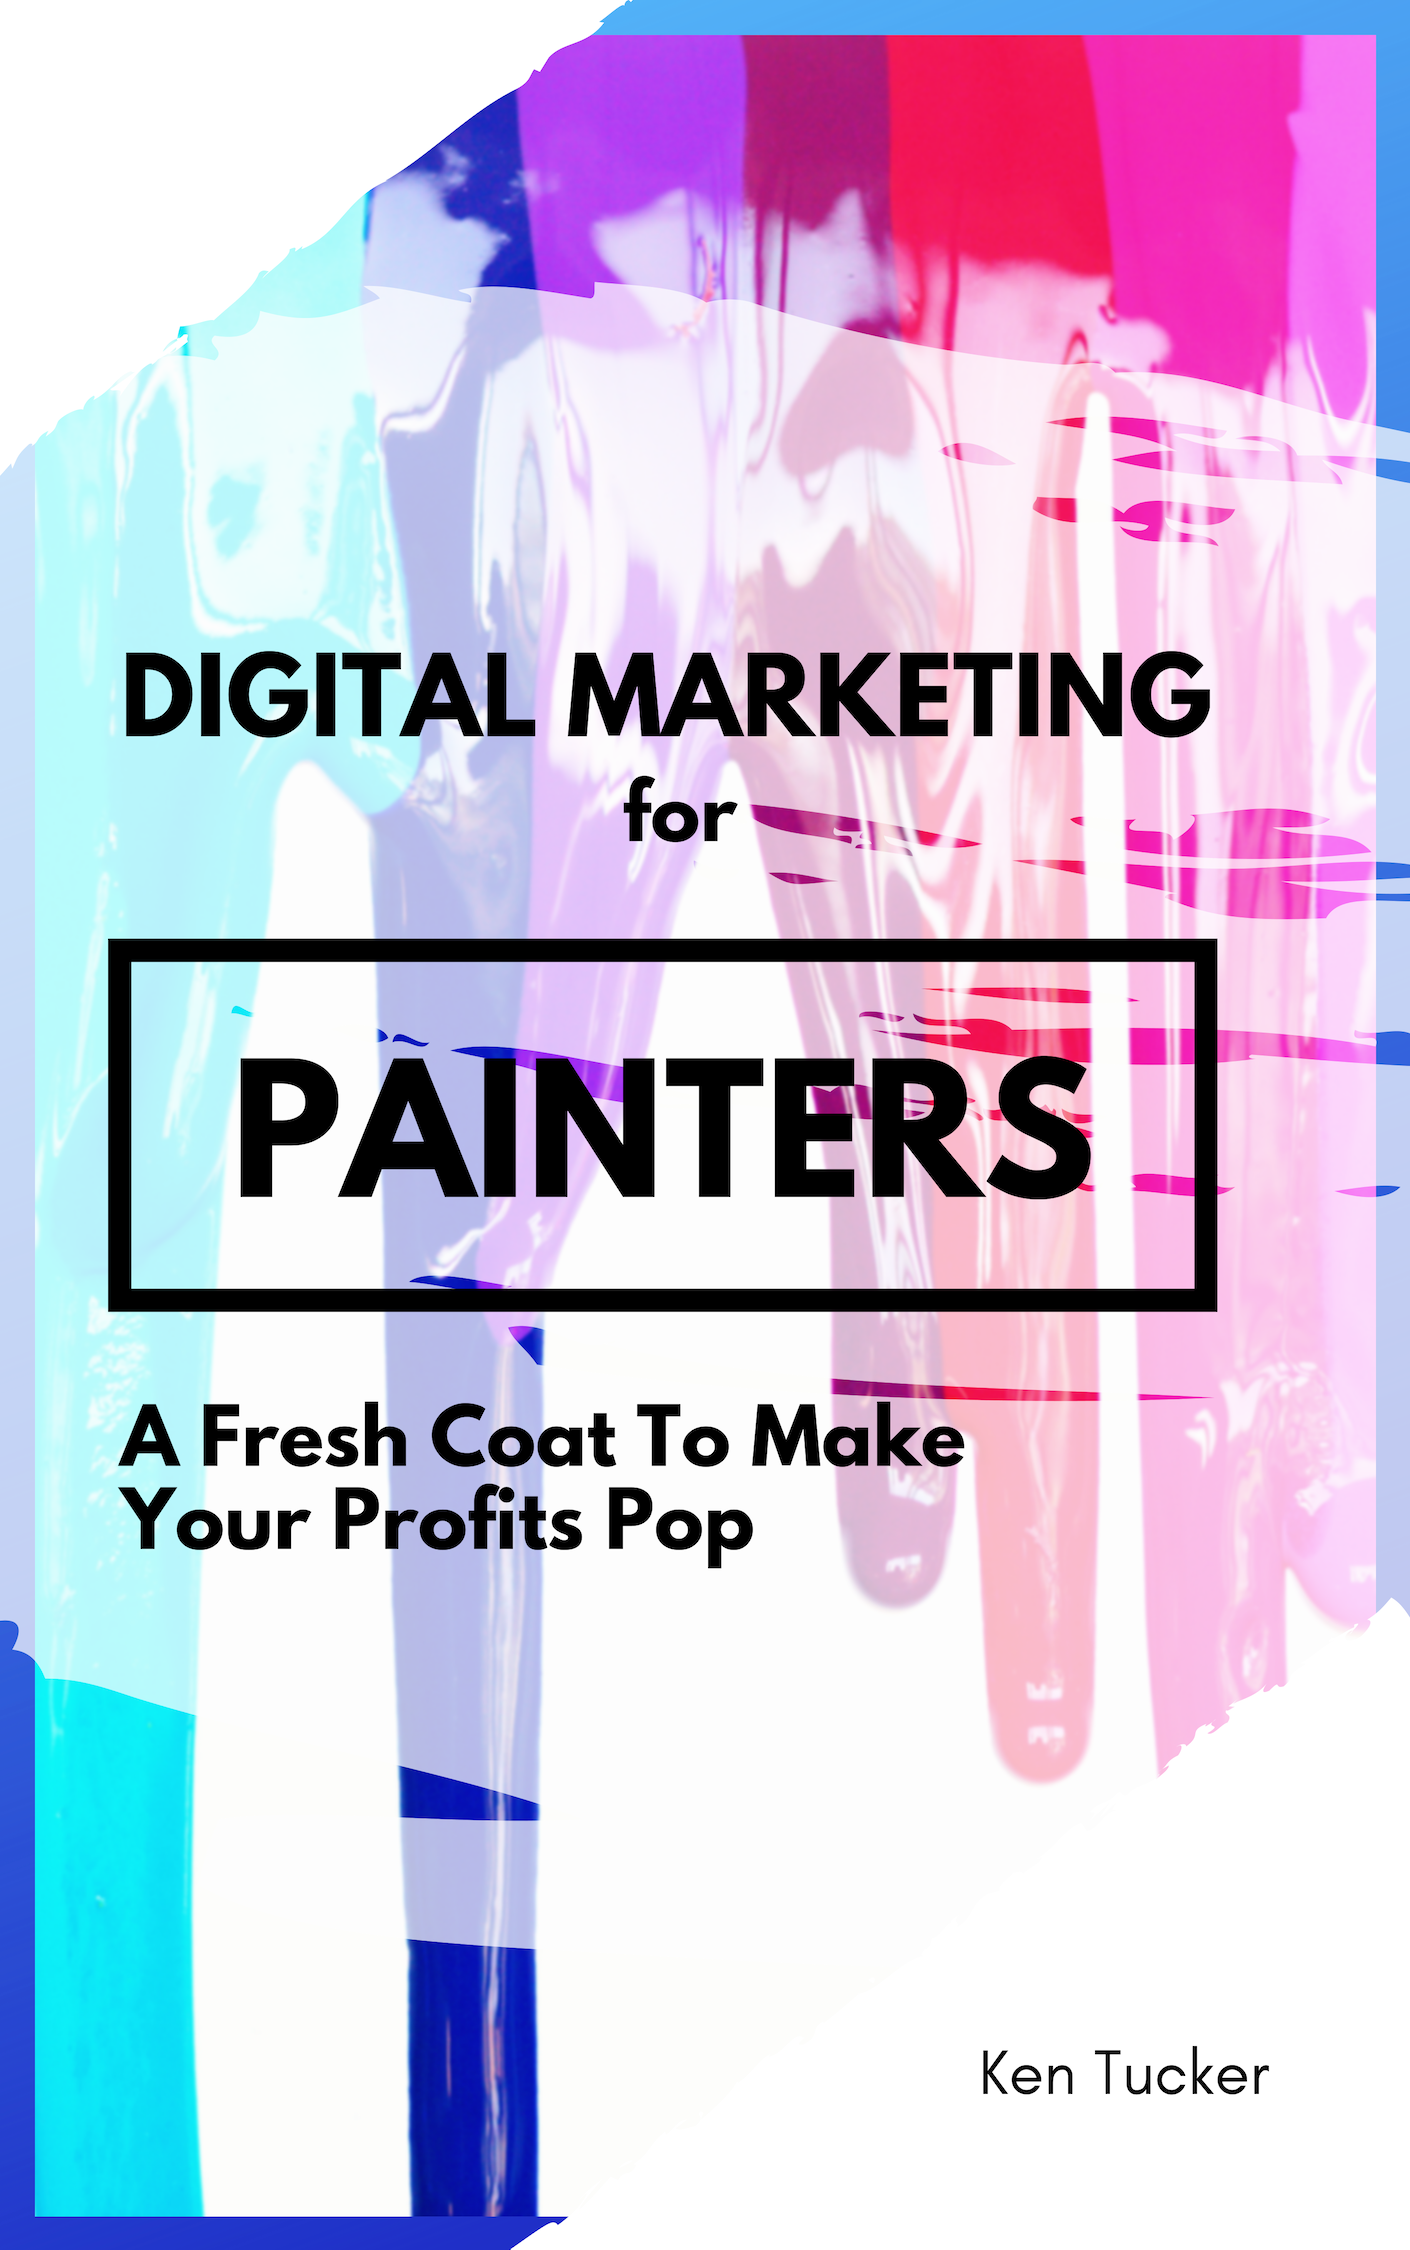 Digital Marketing for Painters Book Cover